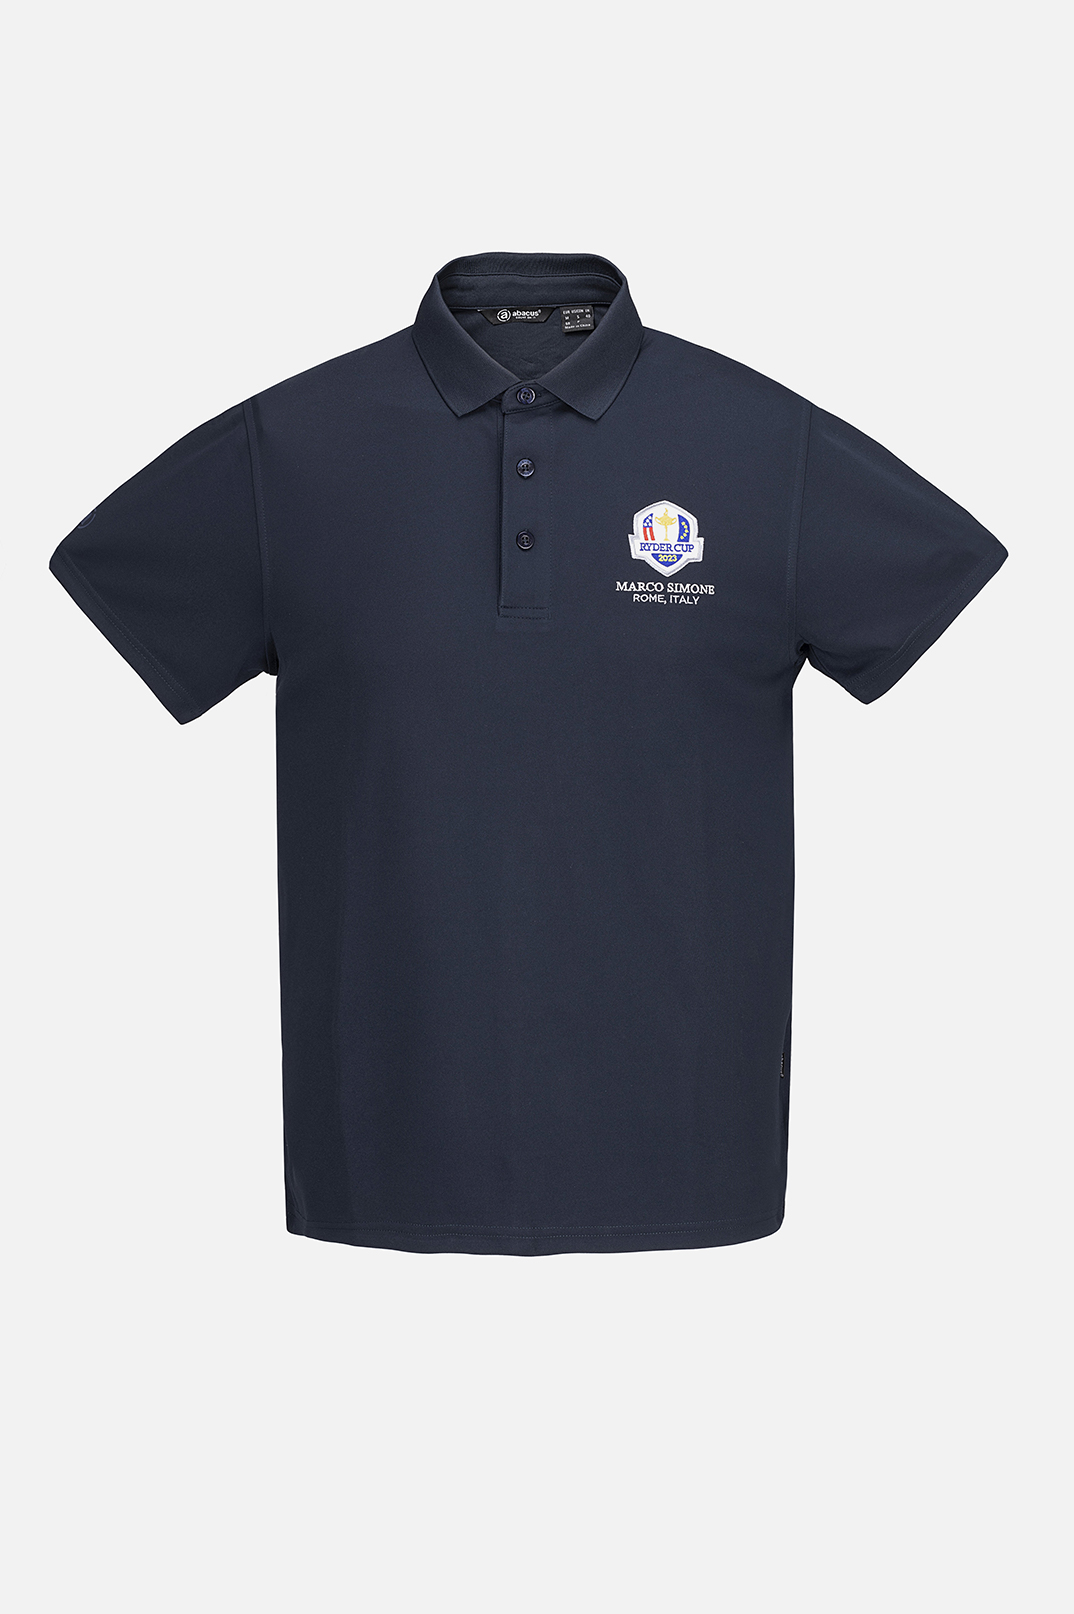 ABACUS DRYCOOL BLUE NAVY 2023 RYDER CUP POLO - GOLF MARCO SIMONE